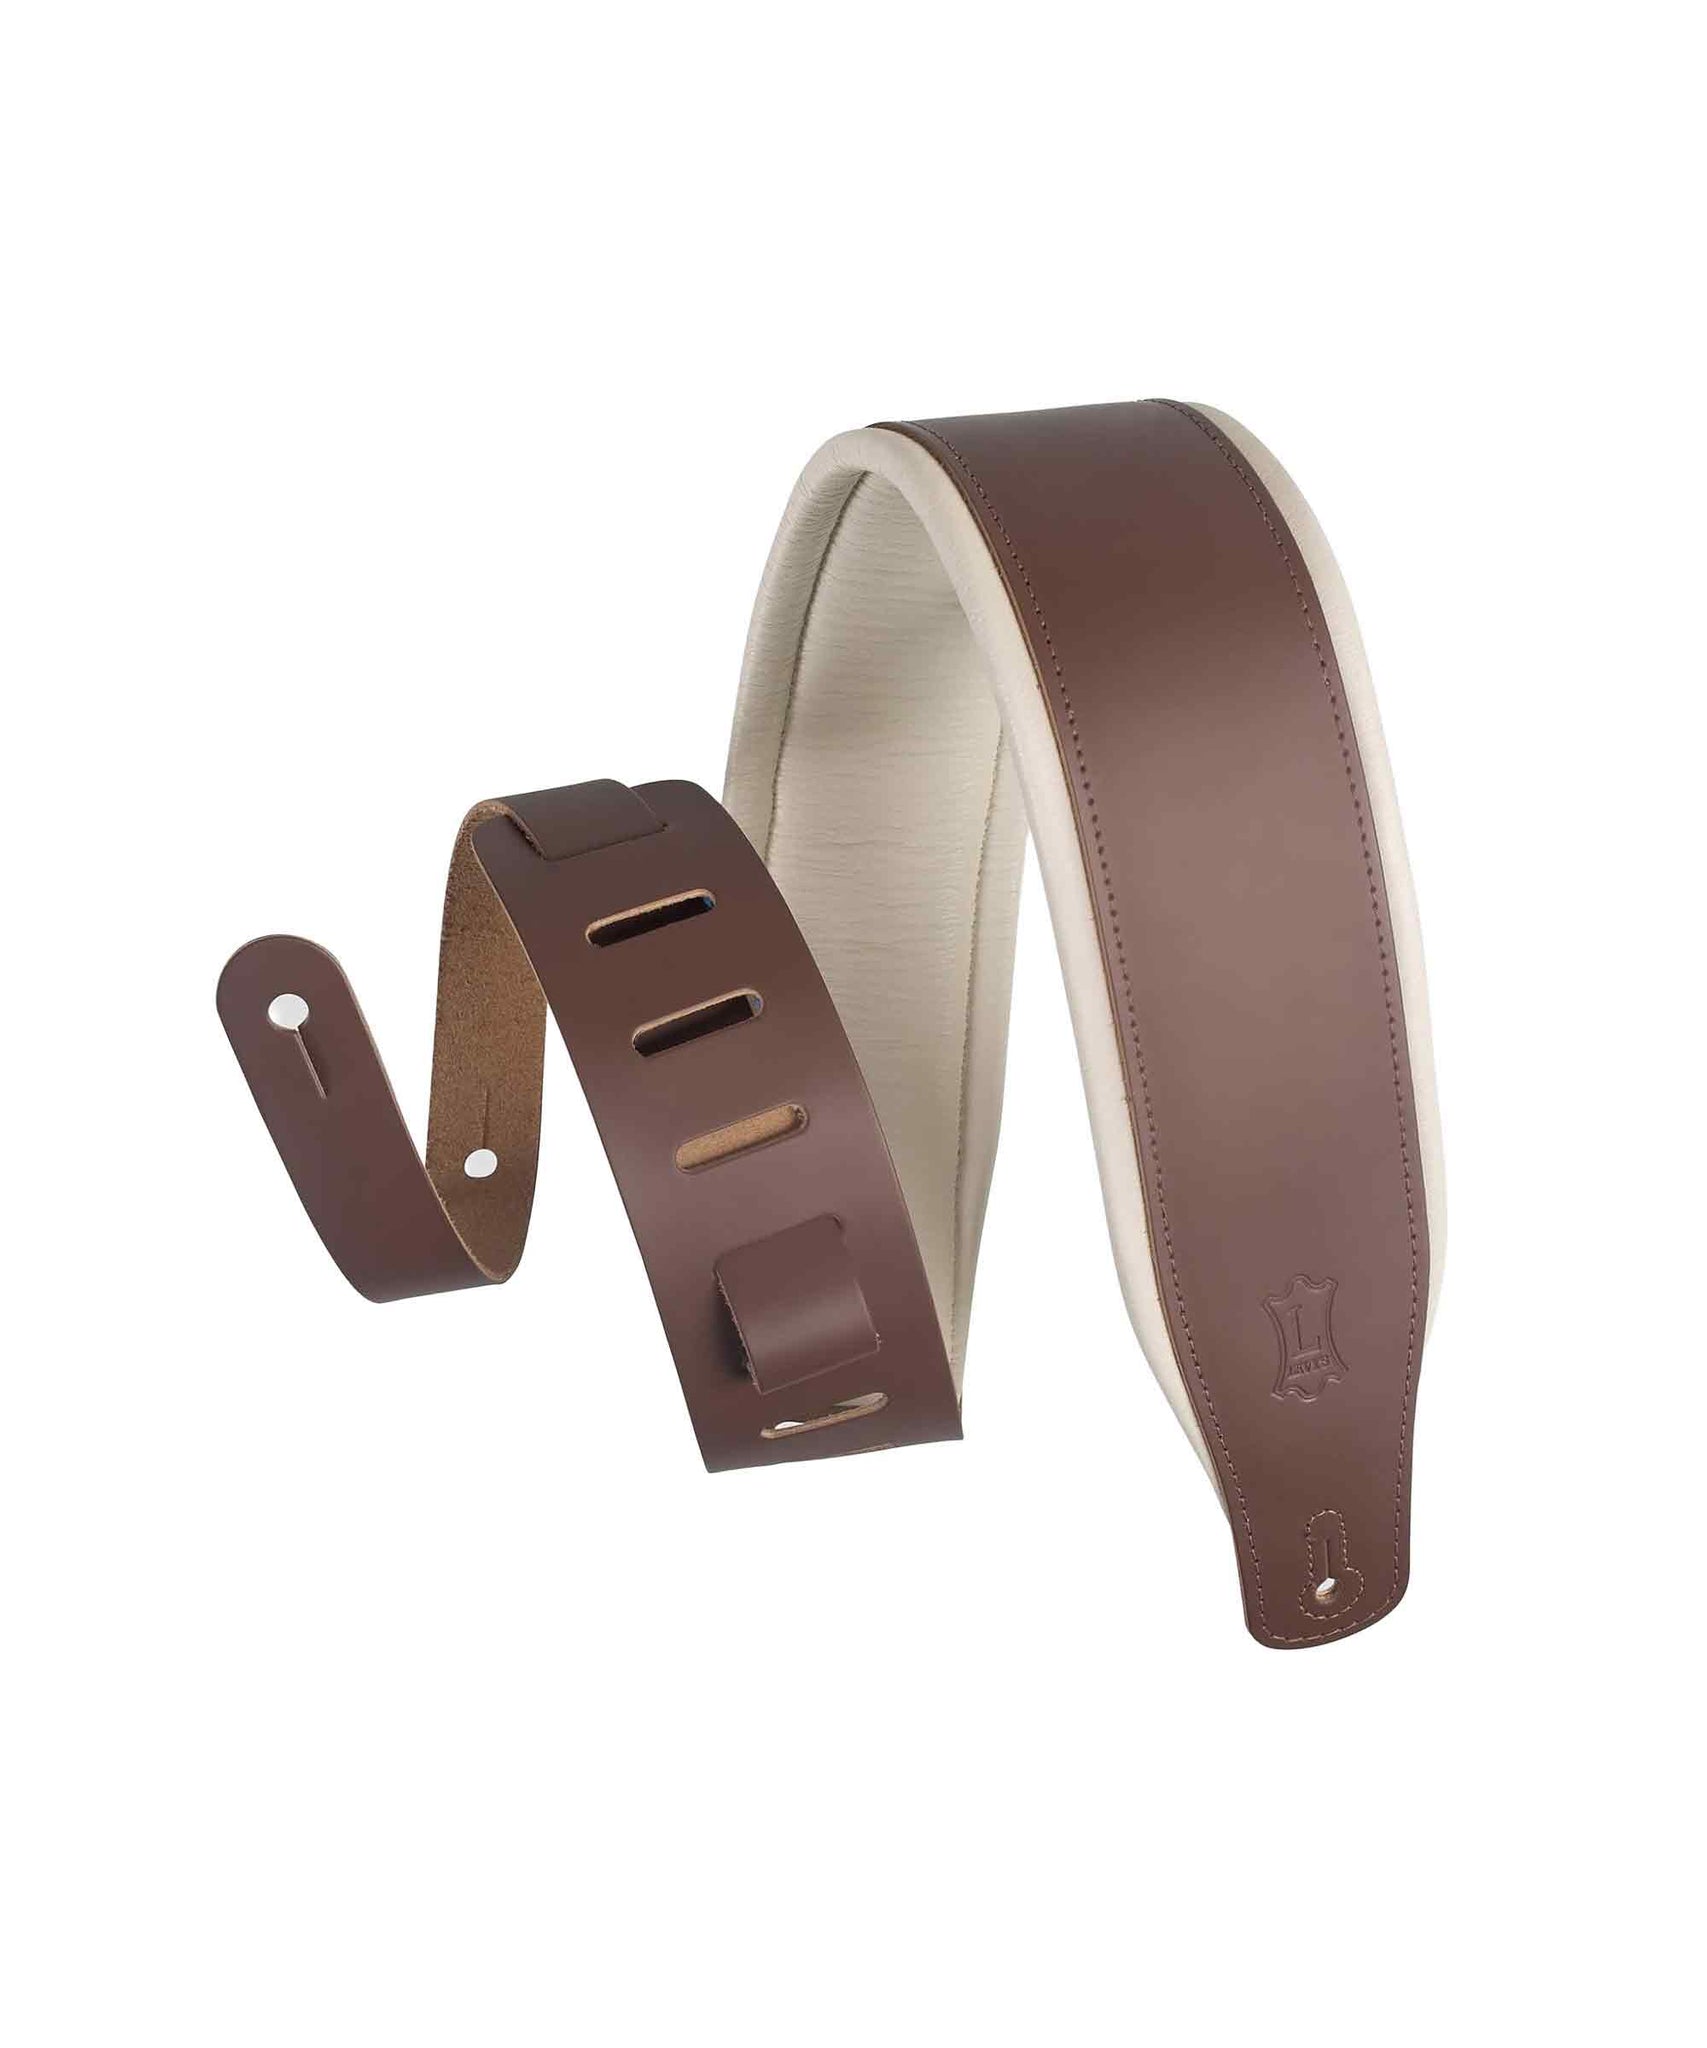 Levy's M26PD-BRN-CRM Top Grain Leather Guitar Strap - Brown and Cream